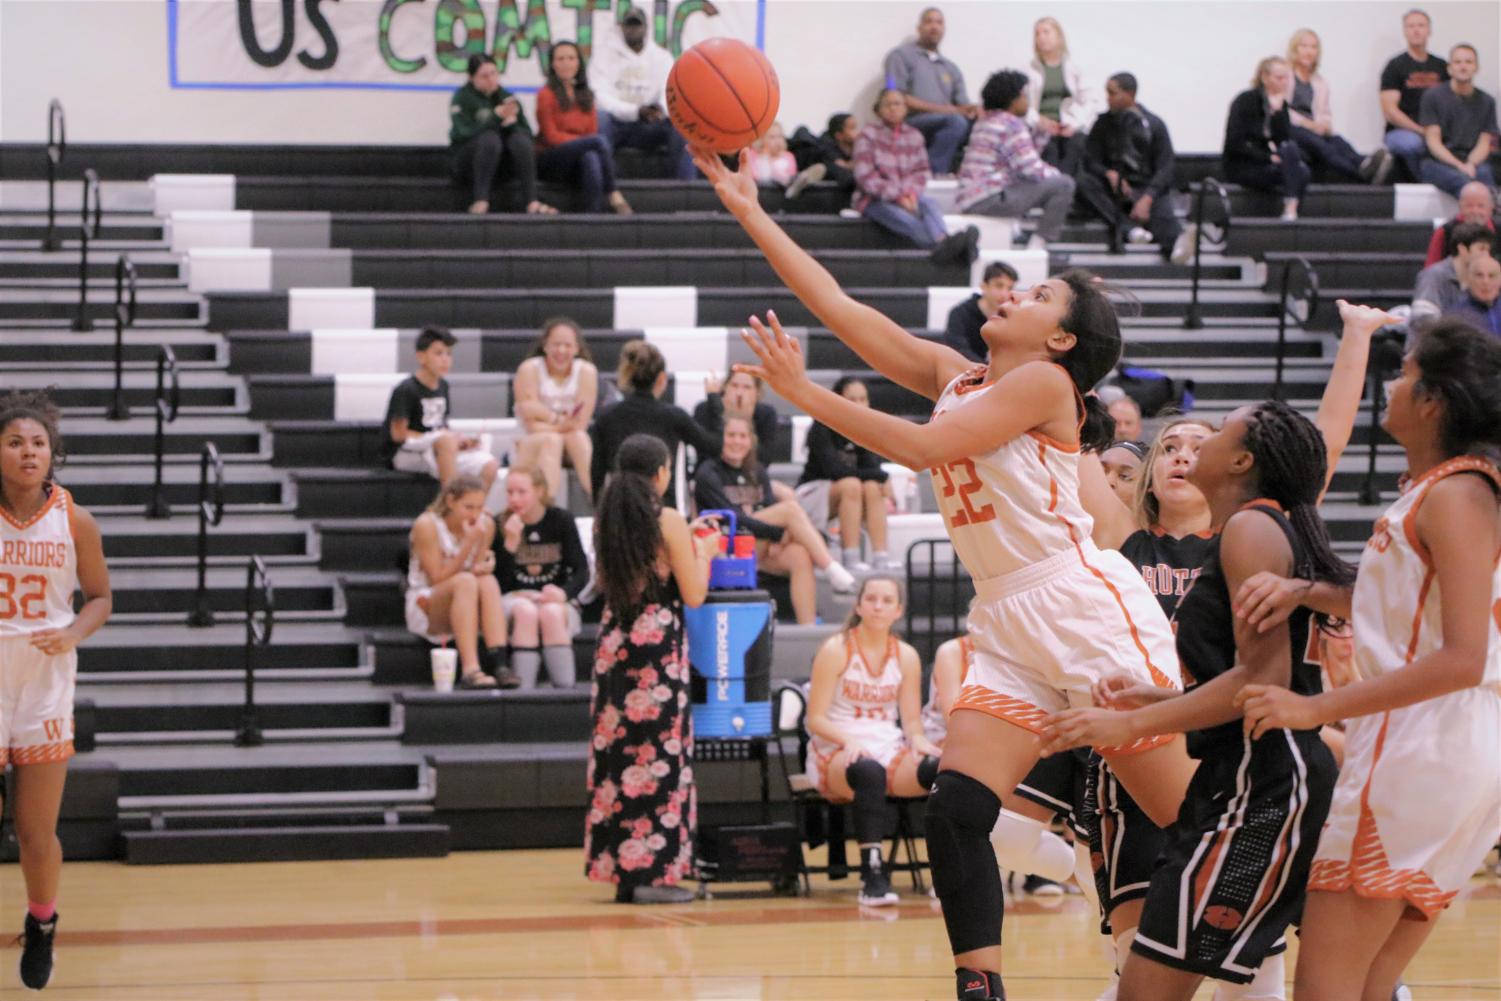 Varsity+Girls+Basketball+Conquers+Hutto+in+79-30+Blowout